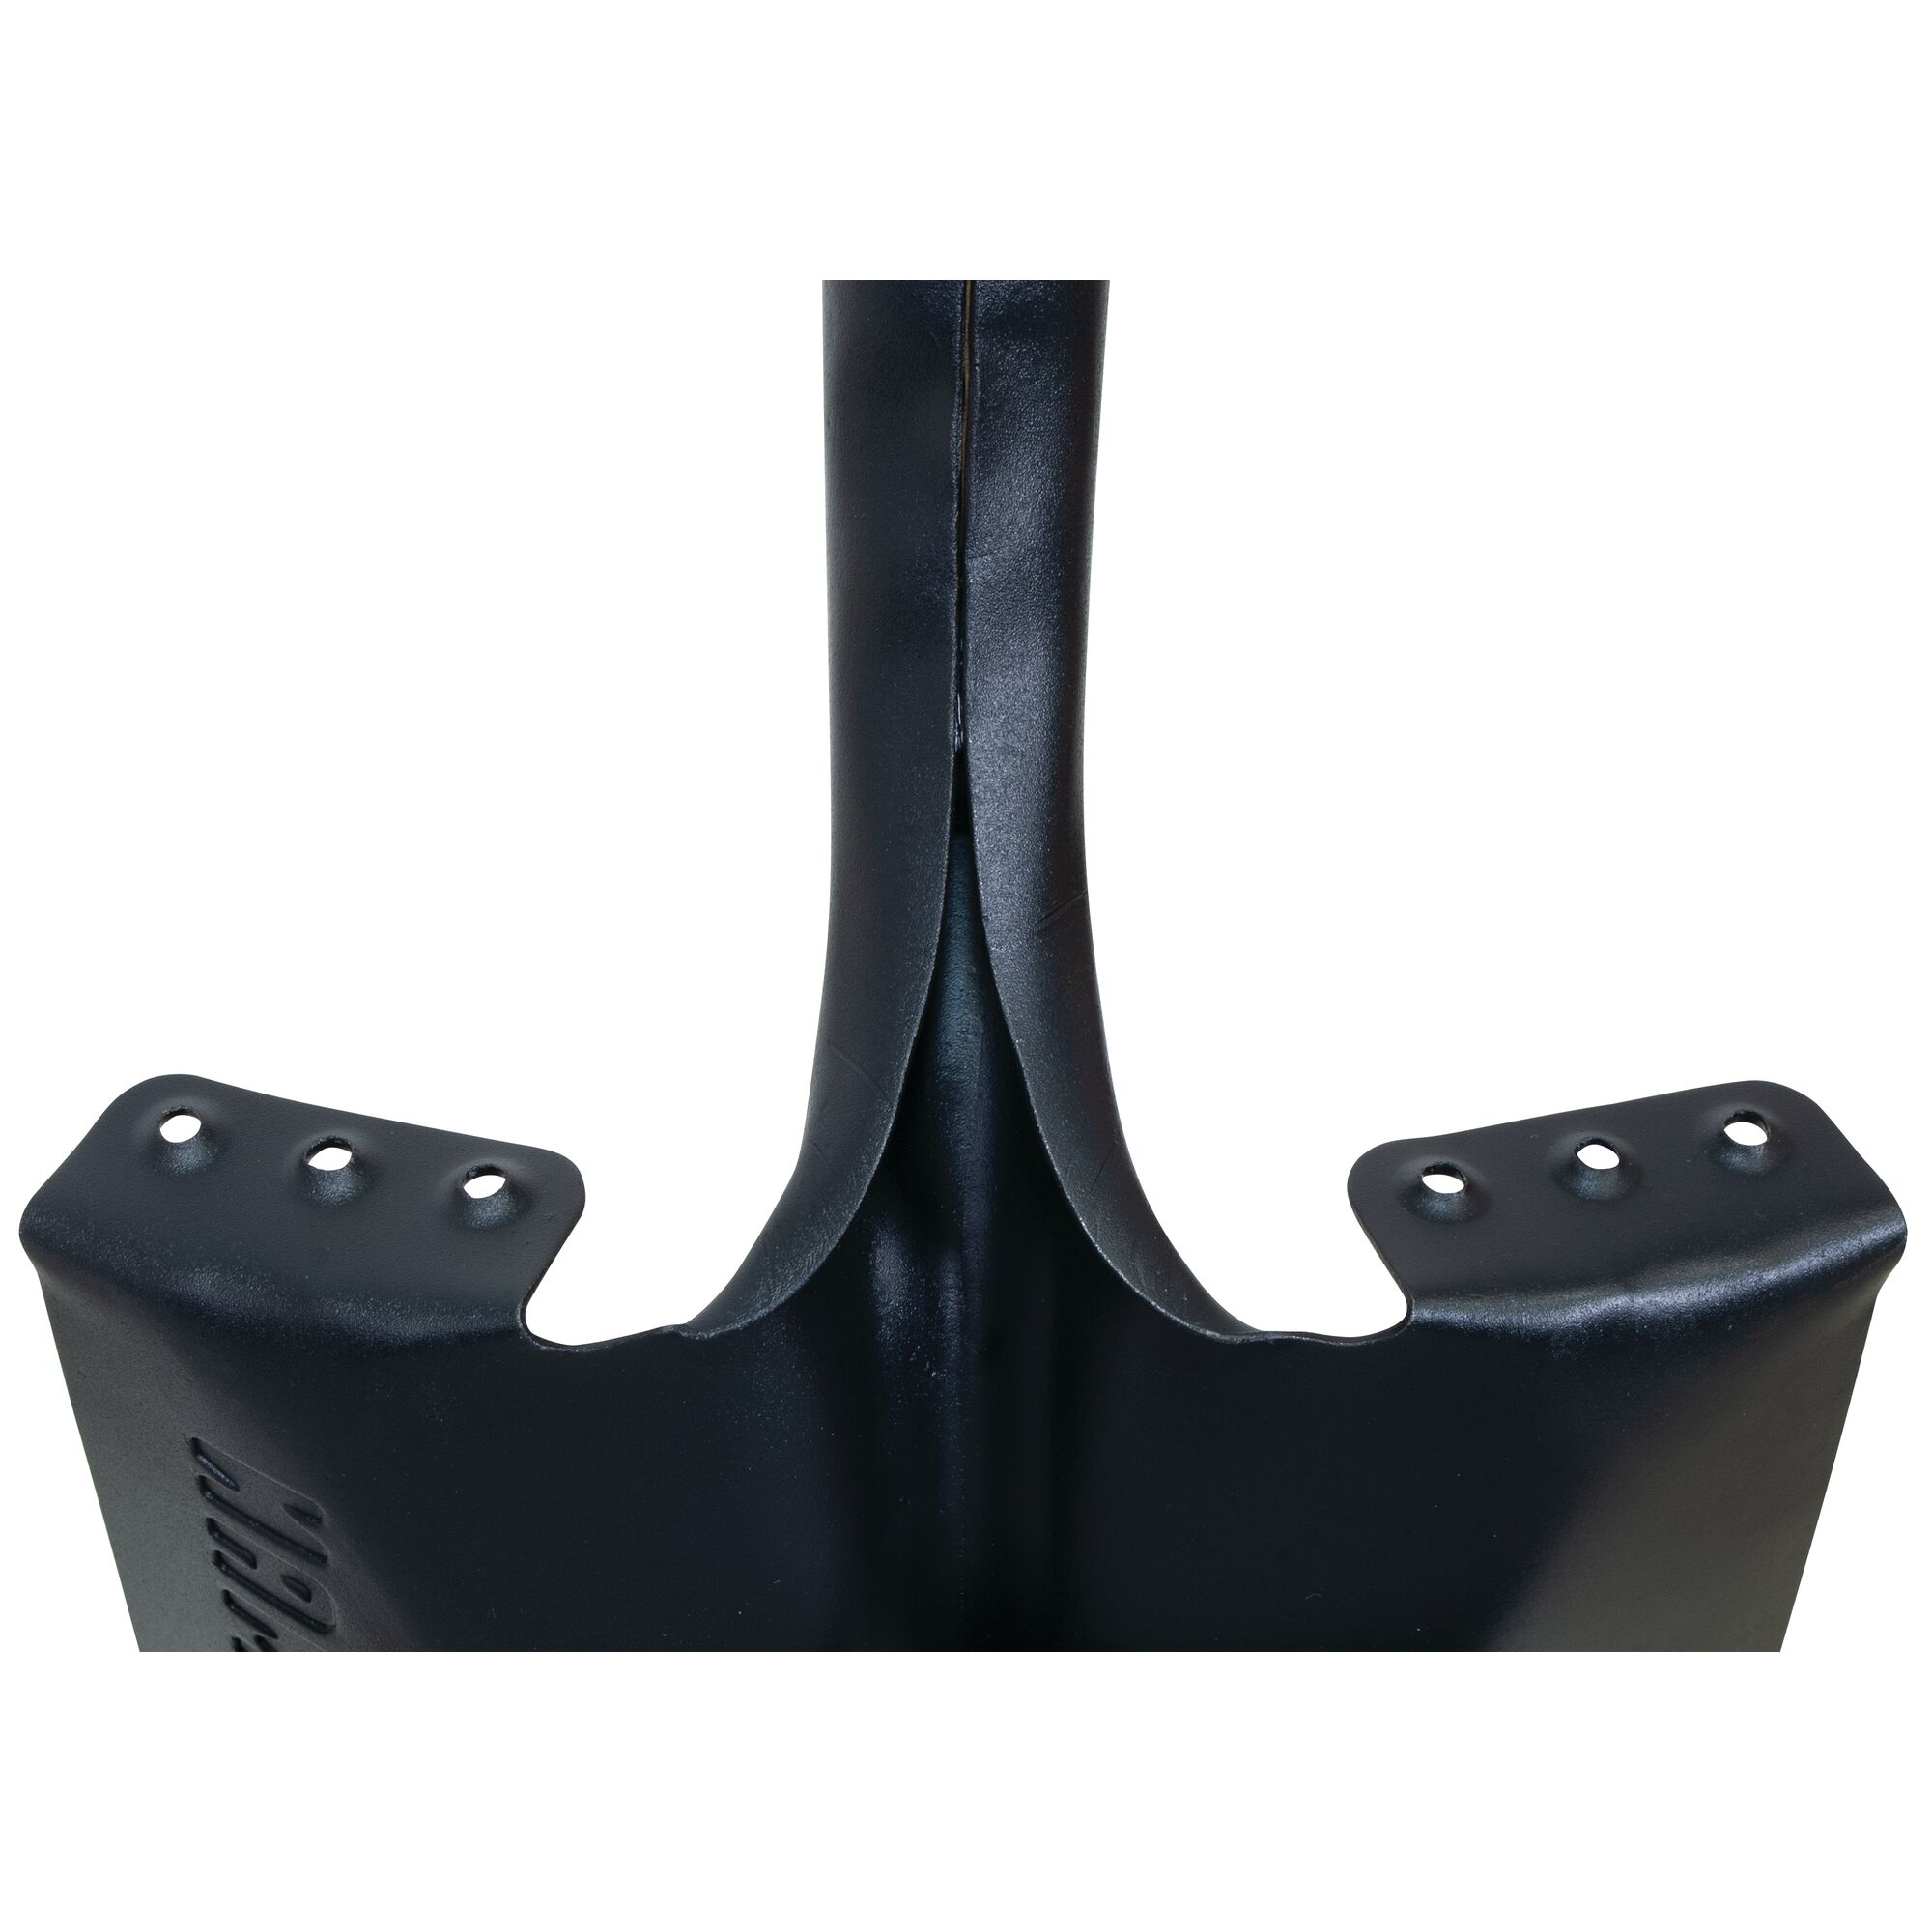 Power collar for secure shovel blade feature in wood handle digging shovel.